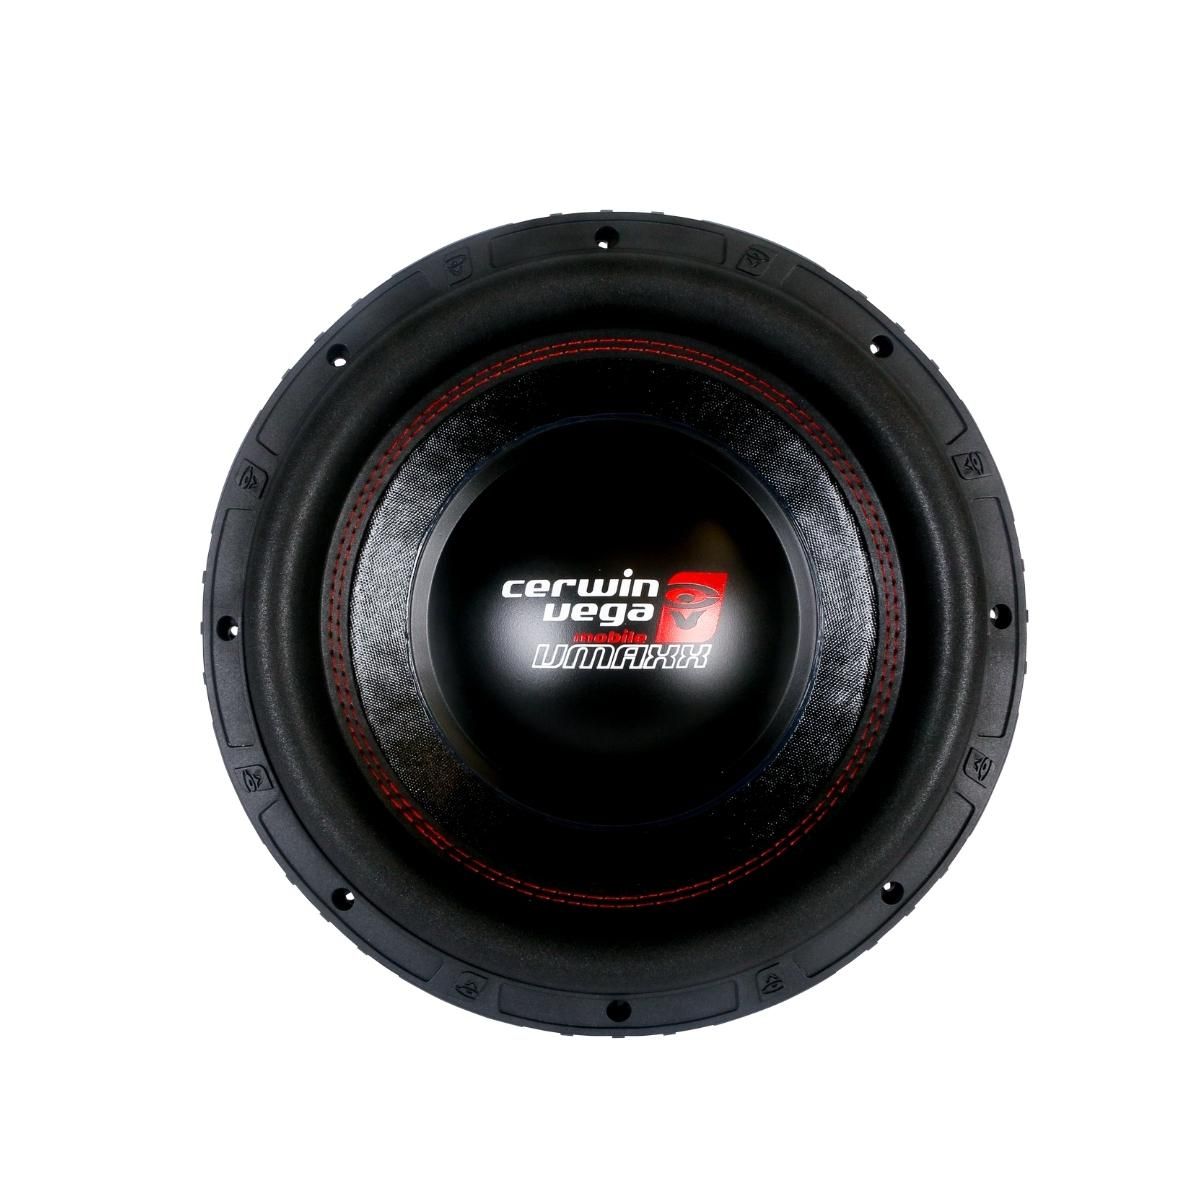 VMAX10D4 -10” Dual 4 Ohm High-Performance Subwoofer 800W RMS